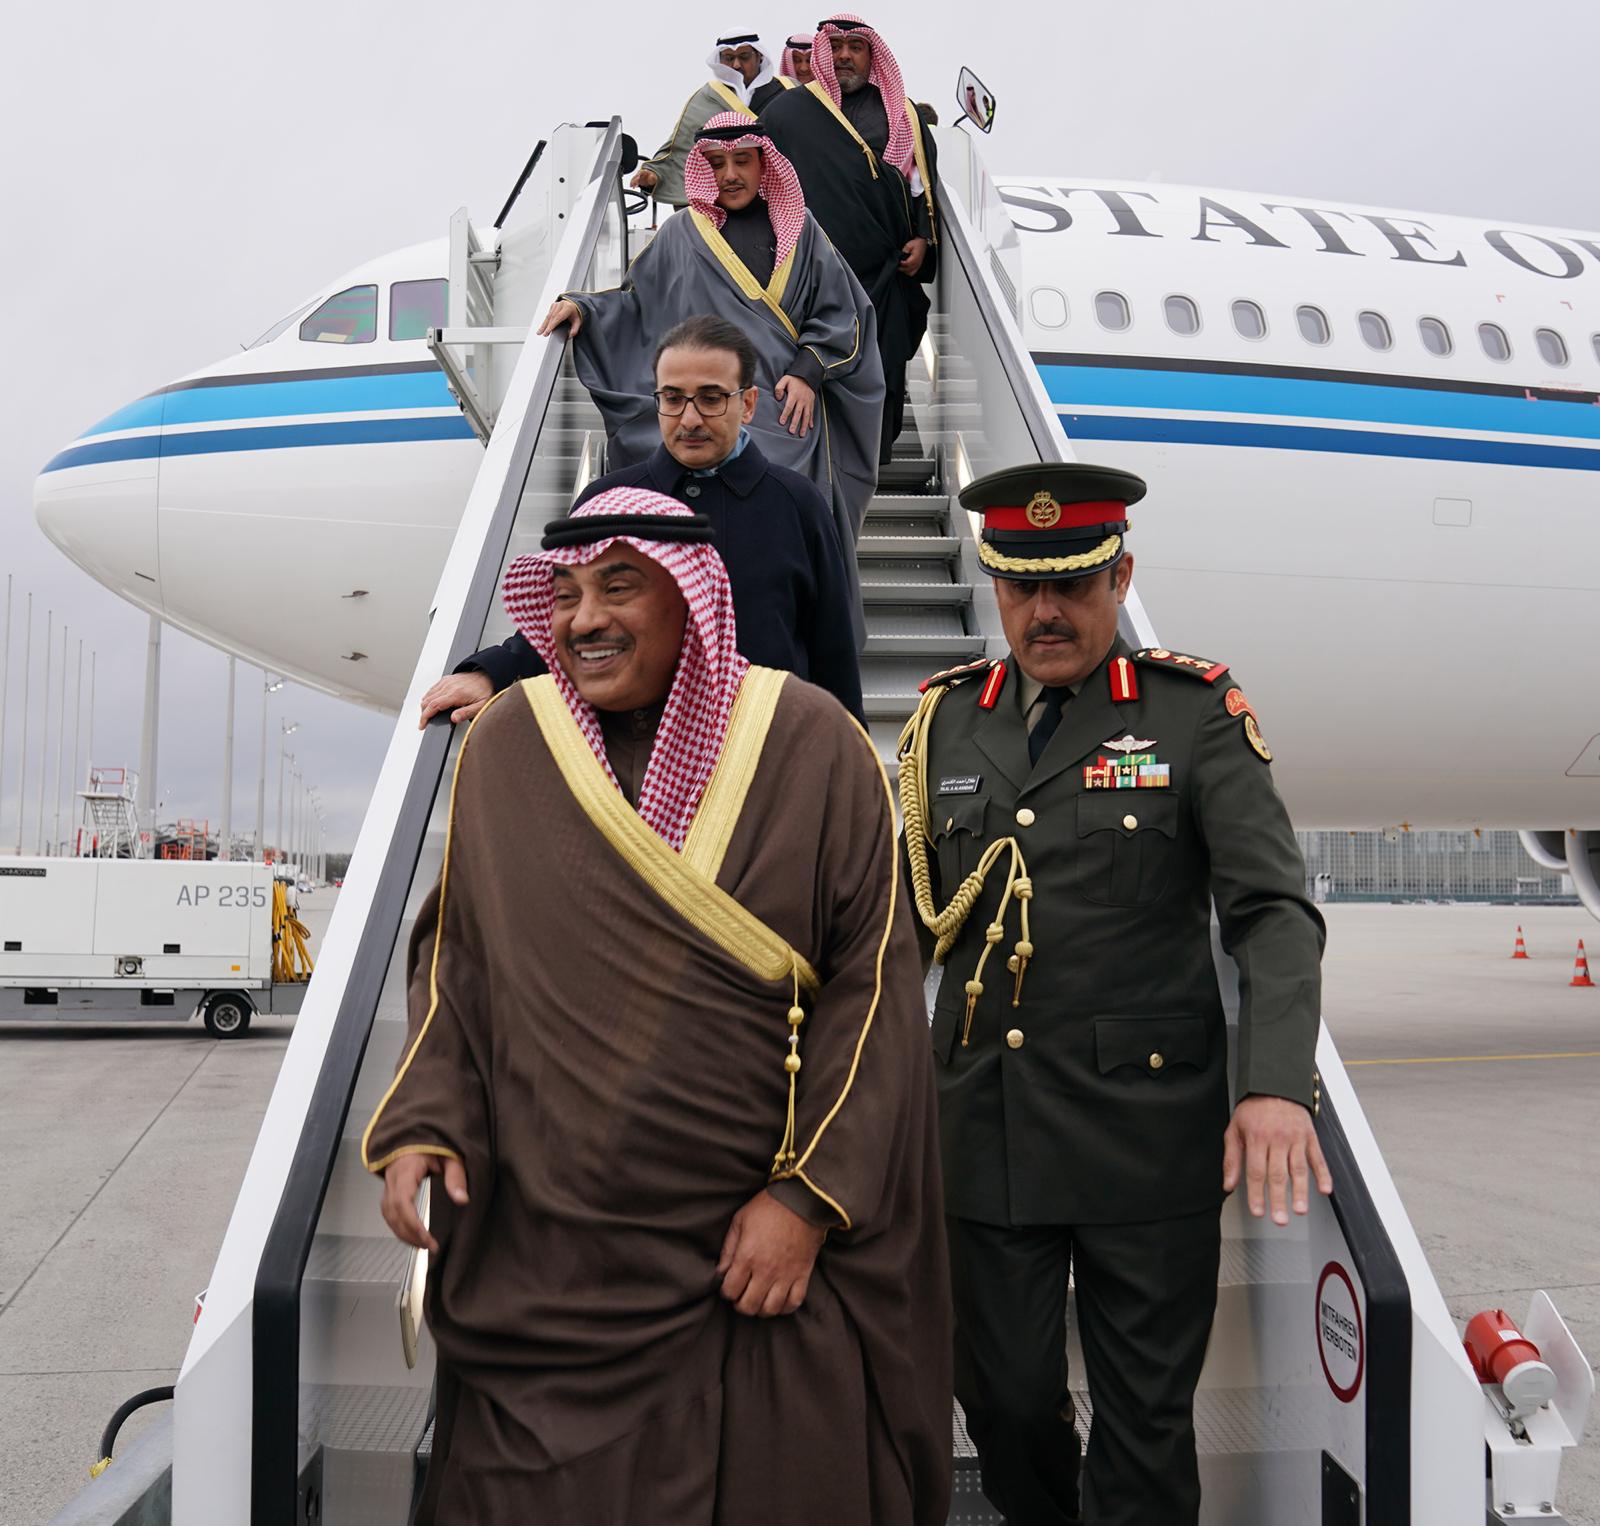 His Highness the Prime Minister arrived in Germany